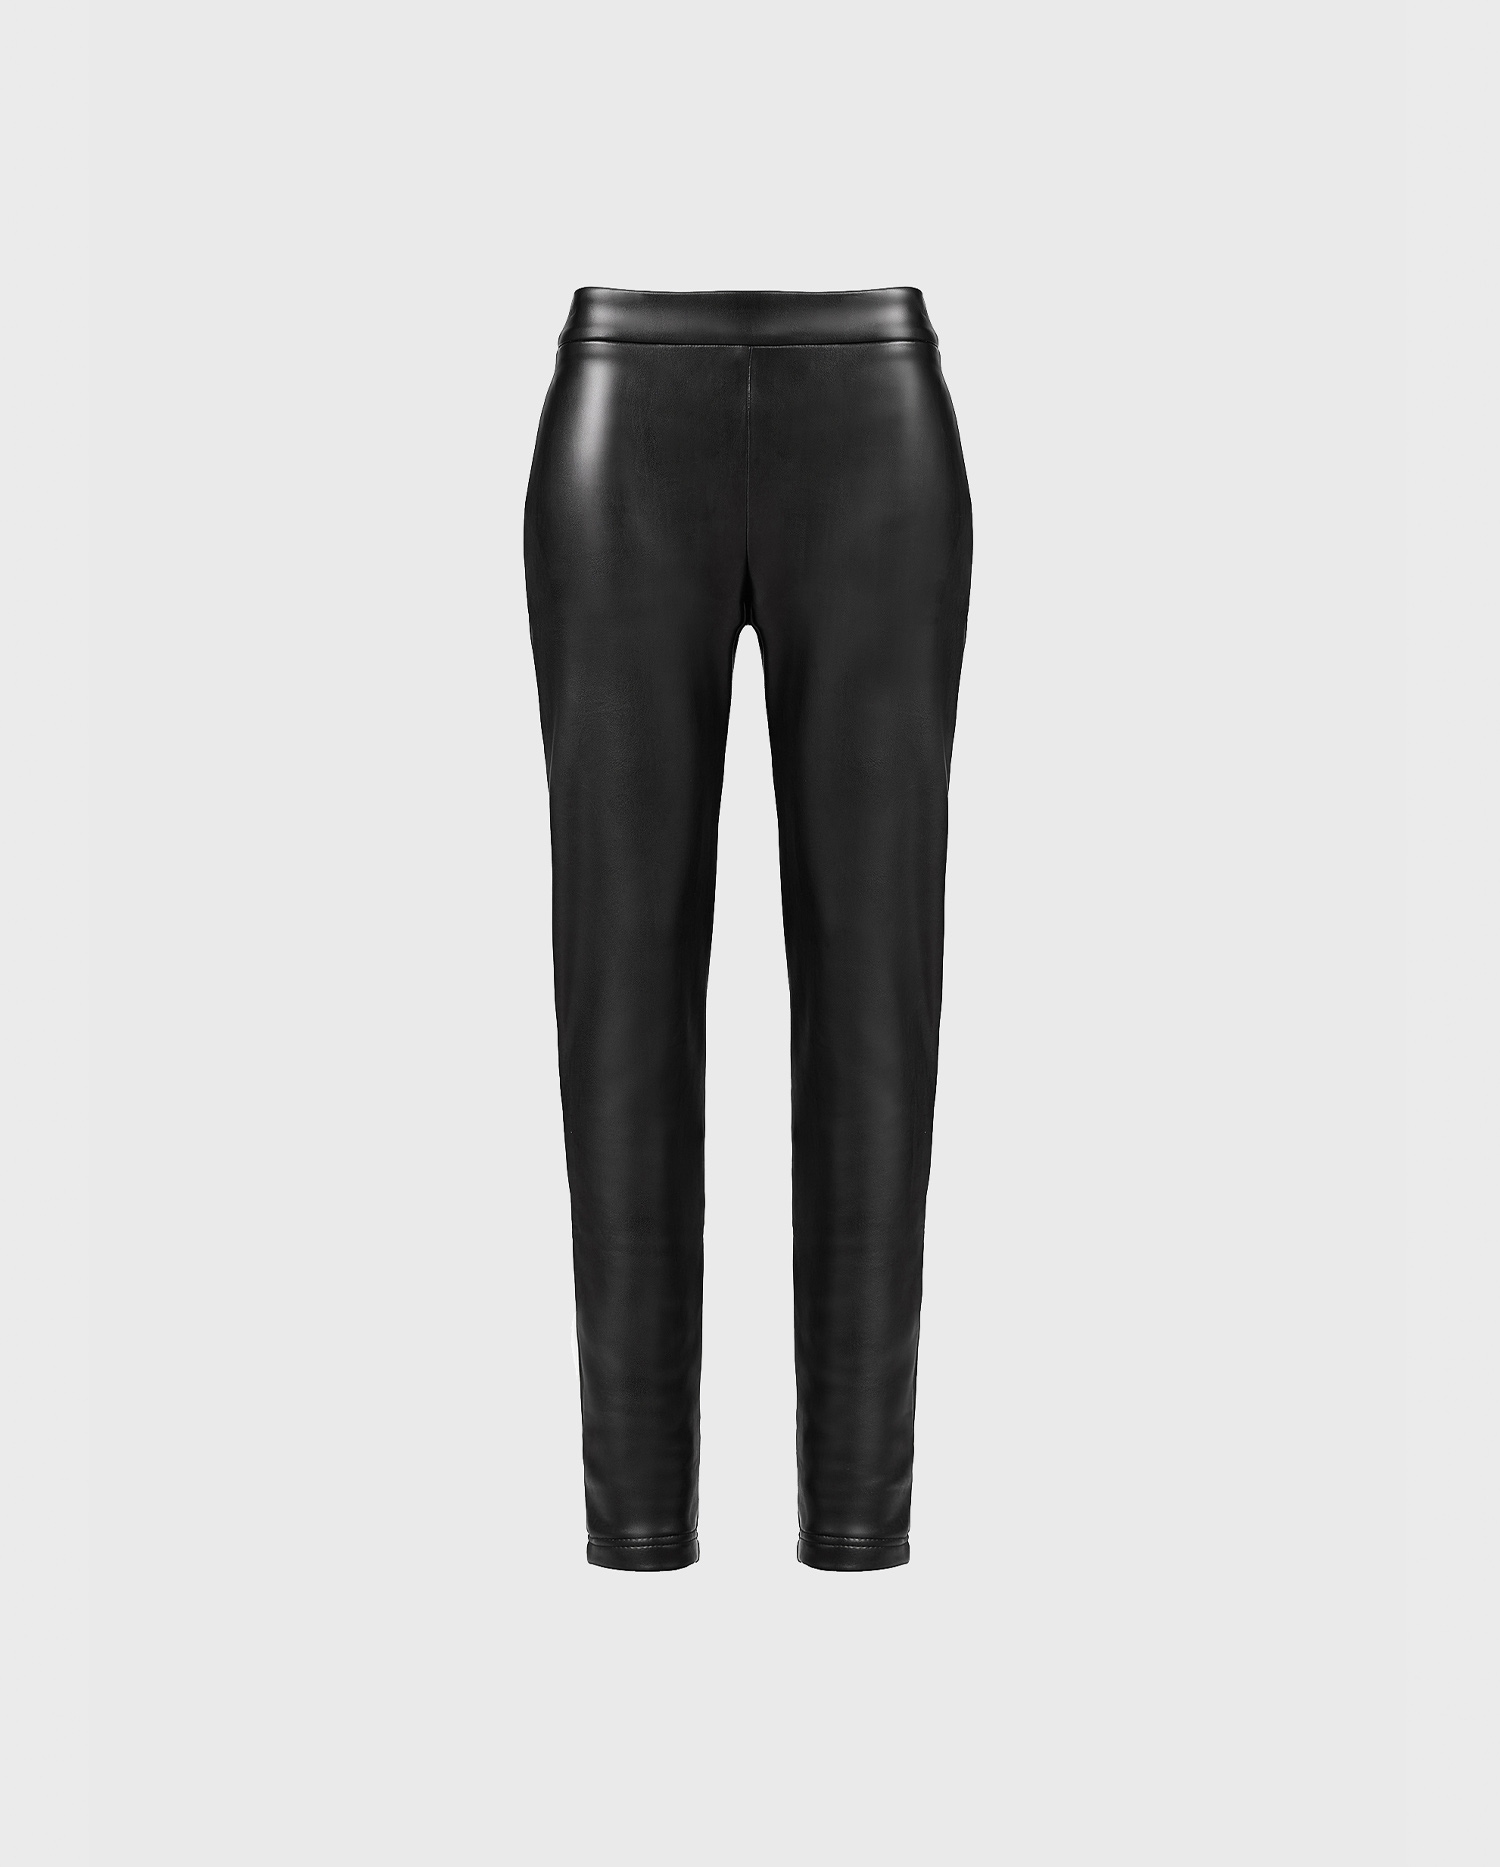 Discover the FANDY Faux leather legging from ANNE FONTAINE